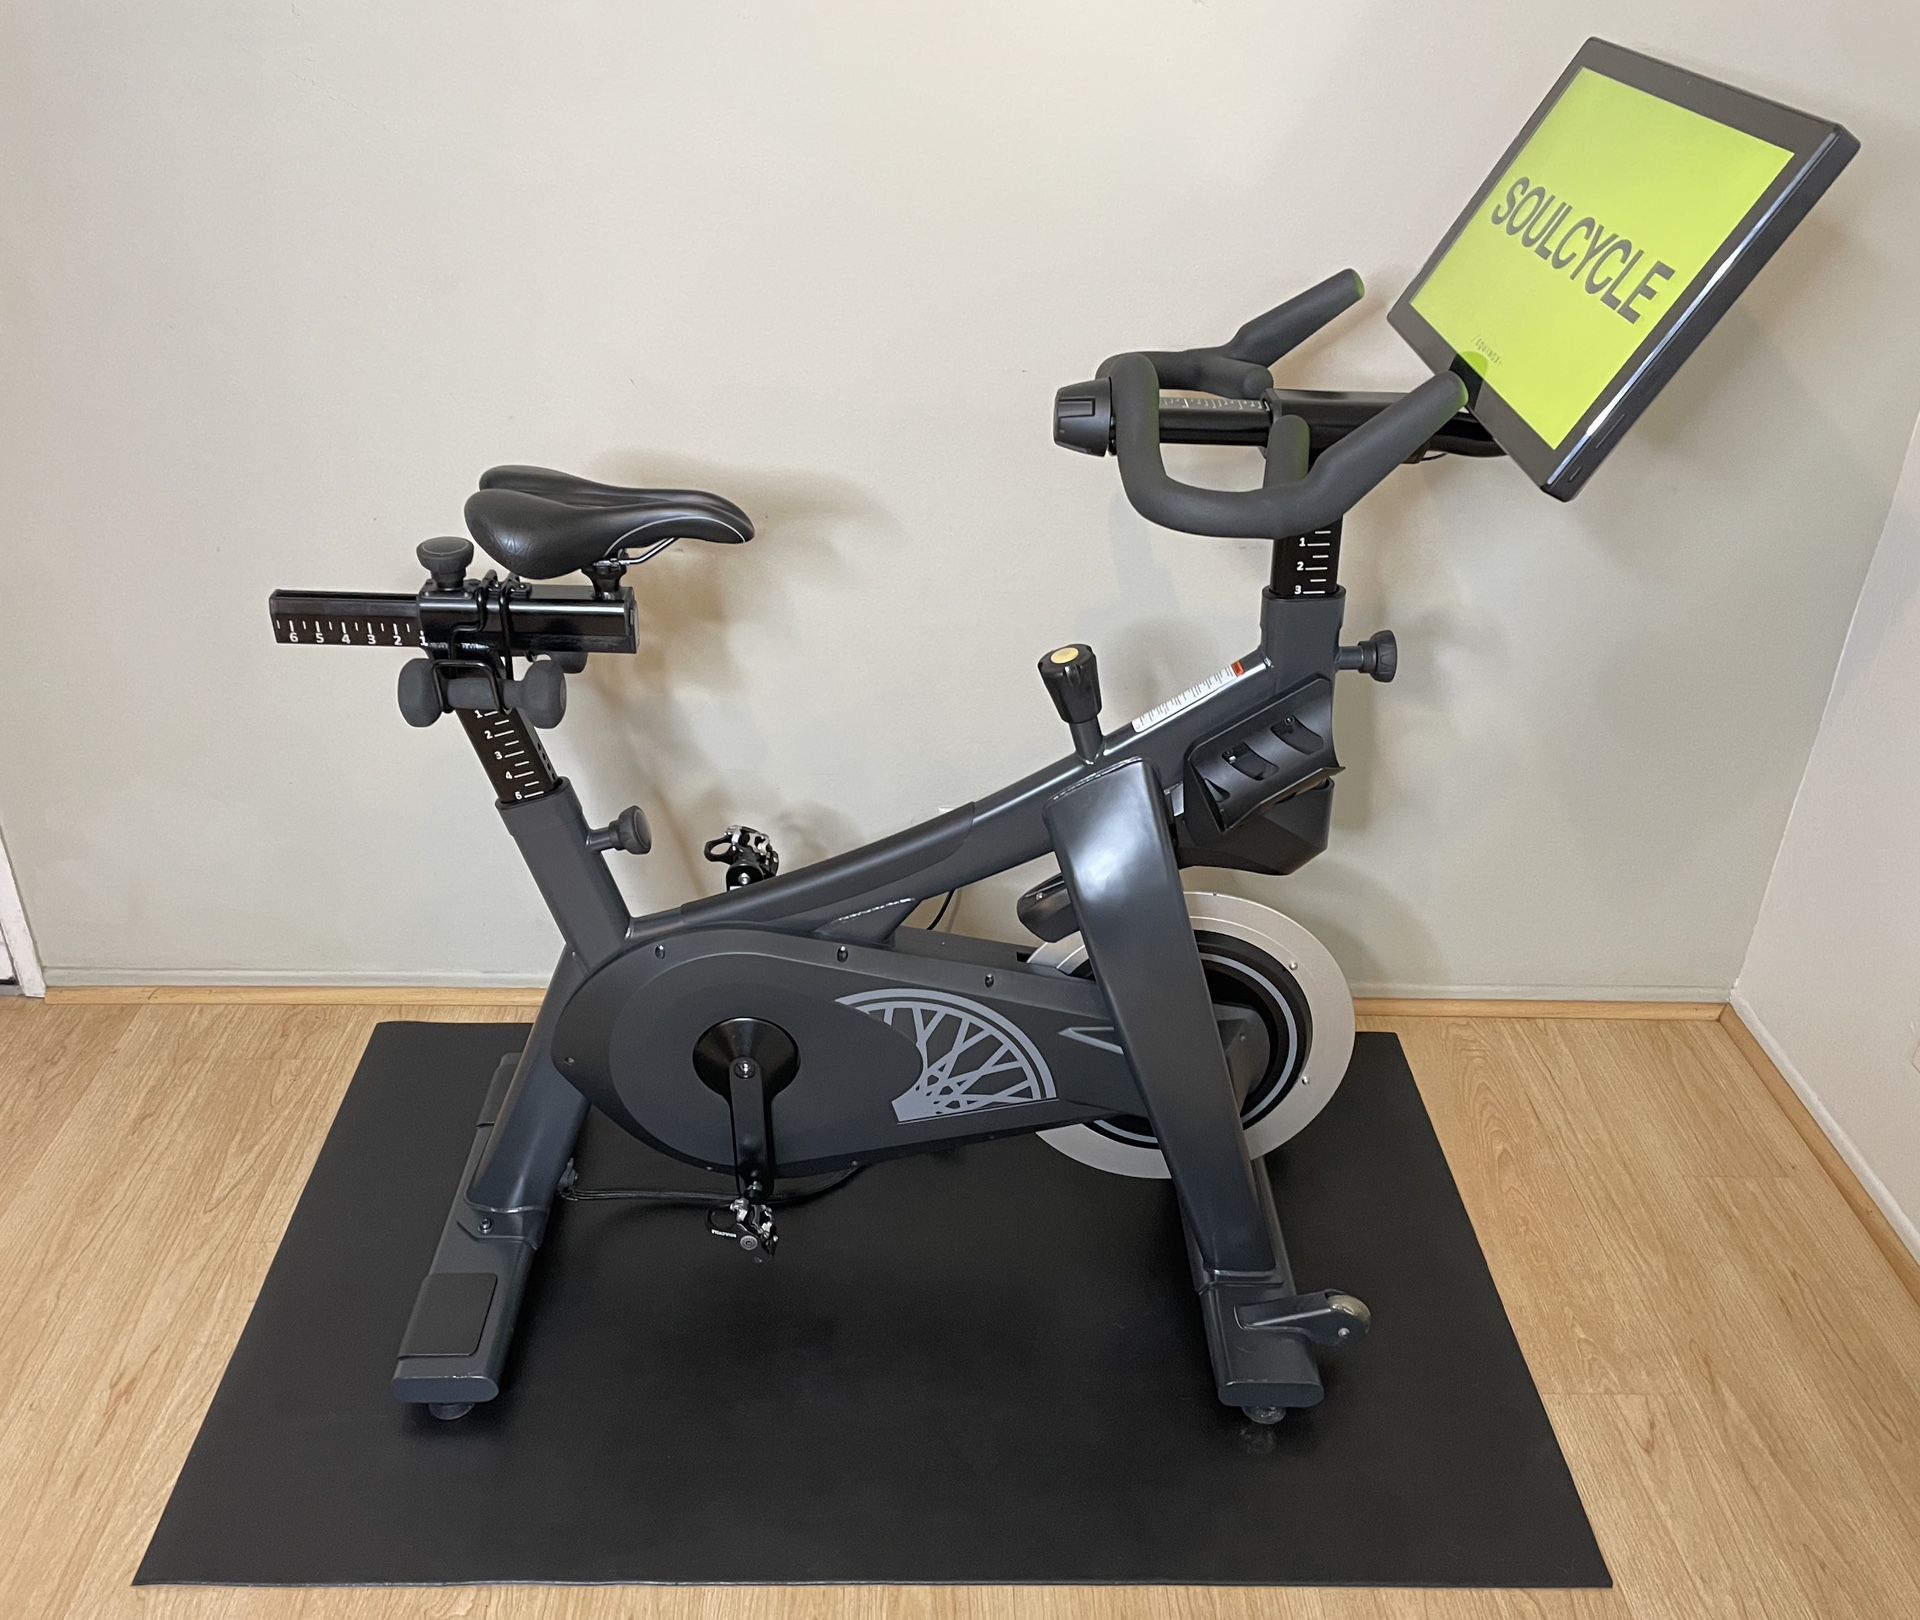 Stages x SoulCycle SC2 Spin Bike Studio Trainer Exercise Bicycle Workout Stationary Commercial Gym